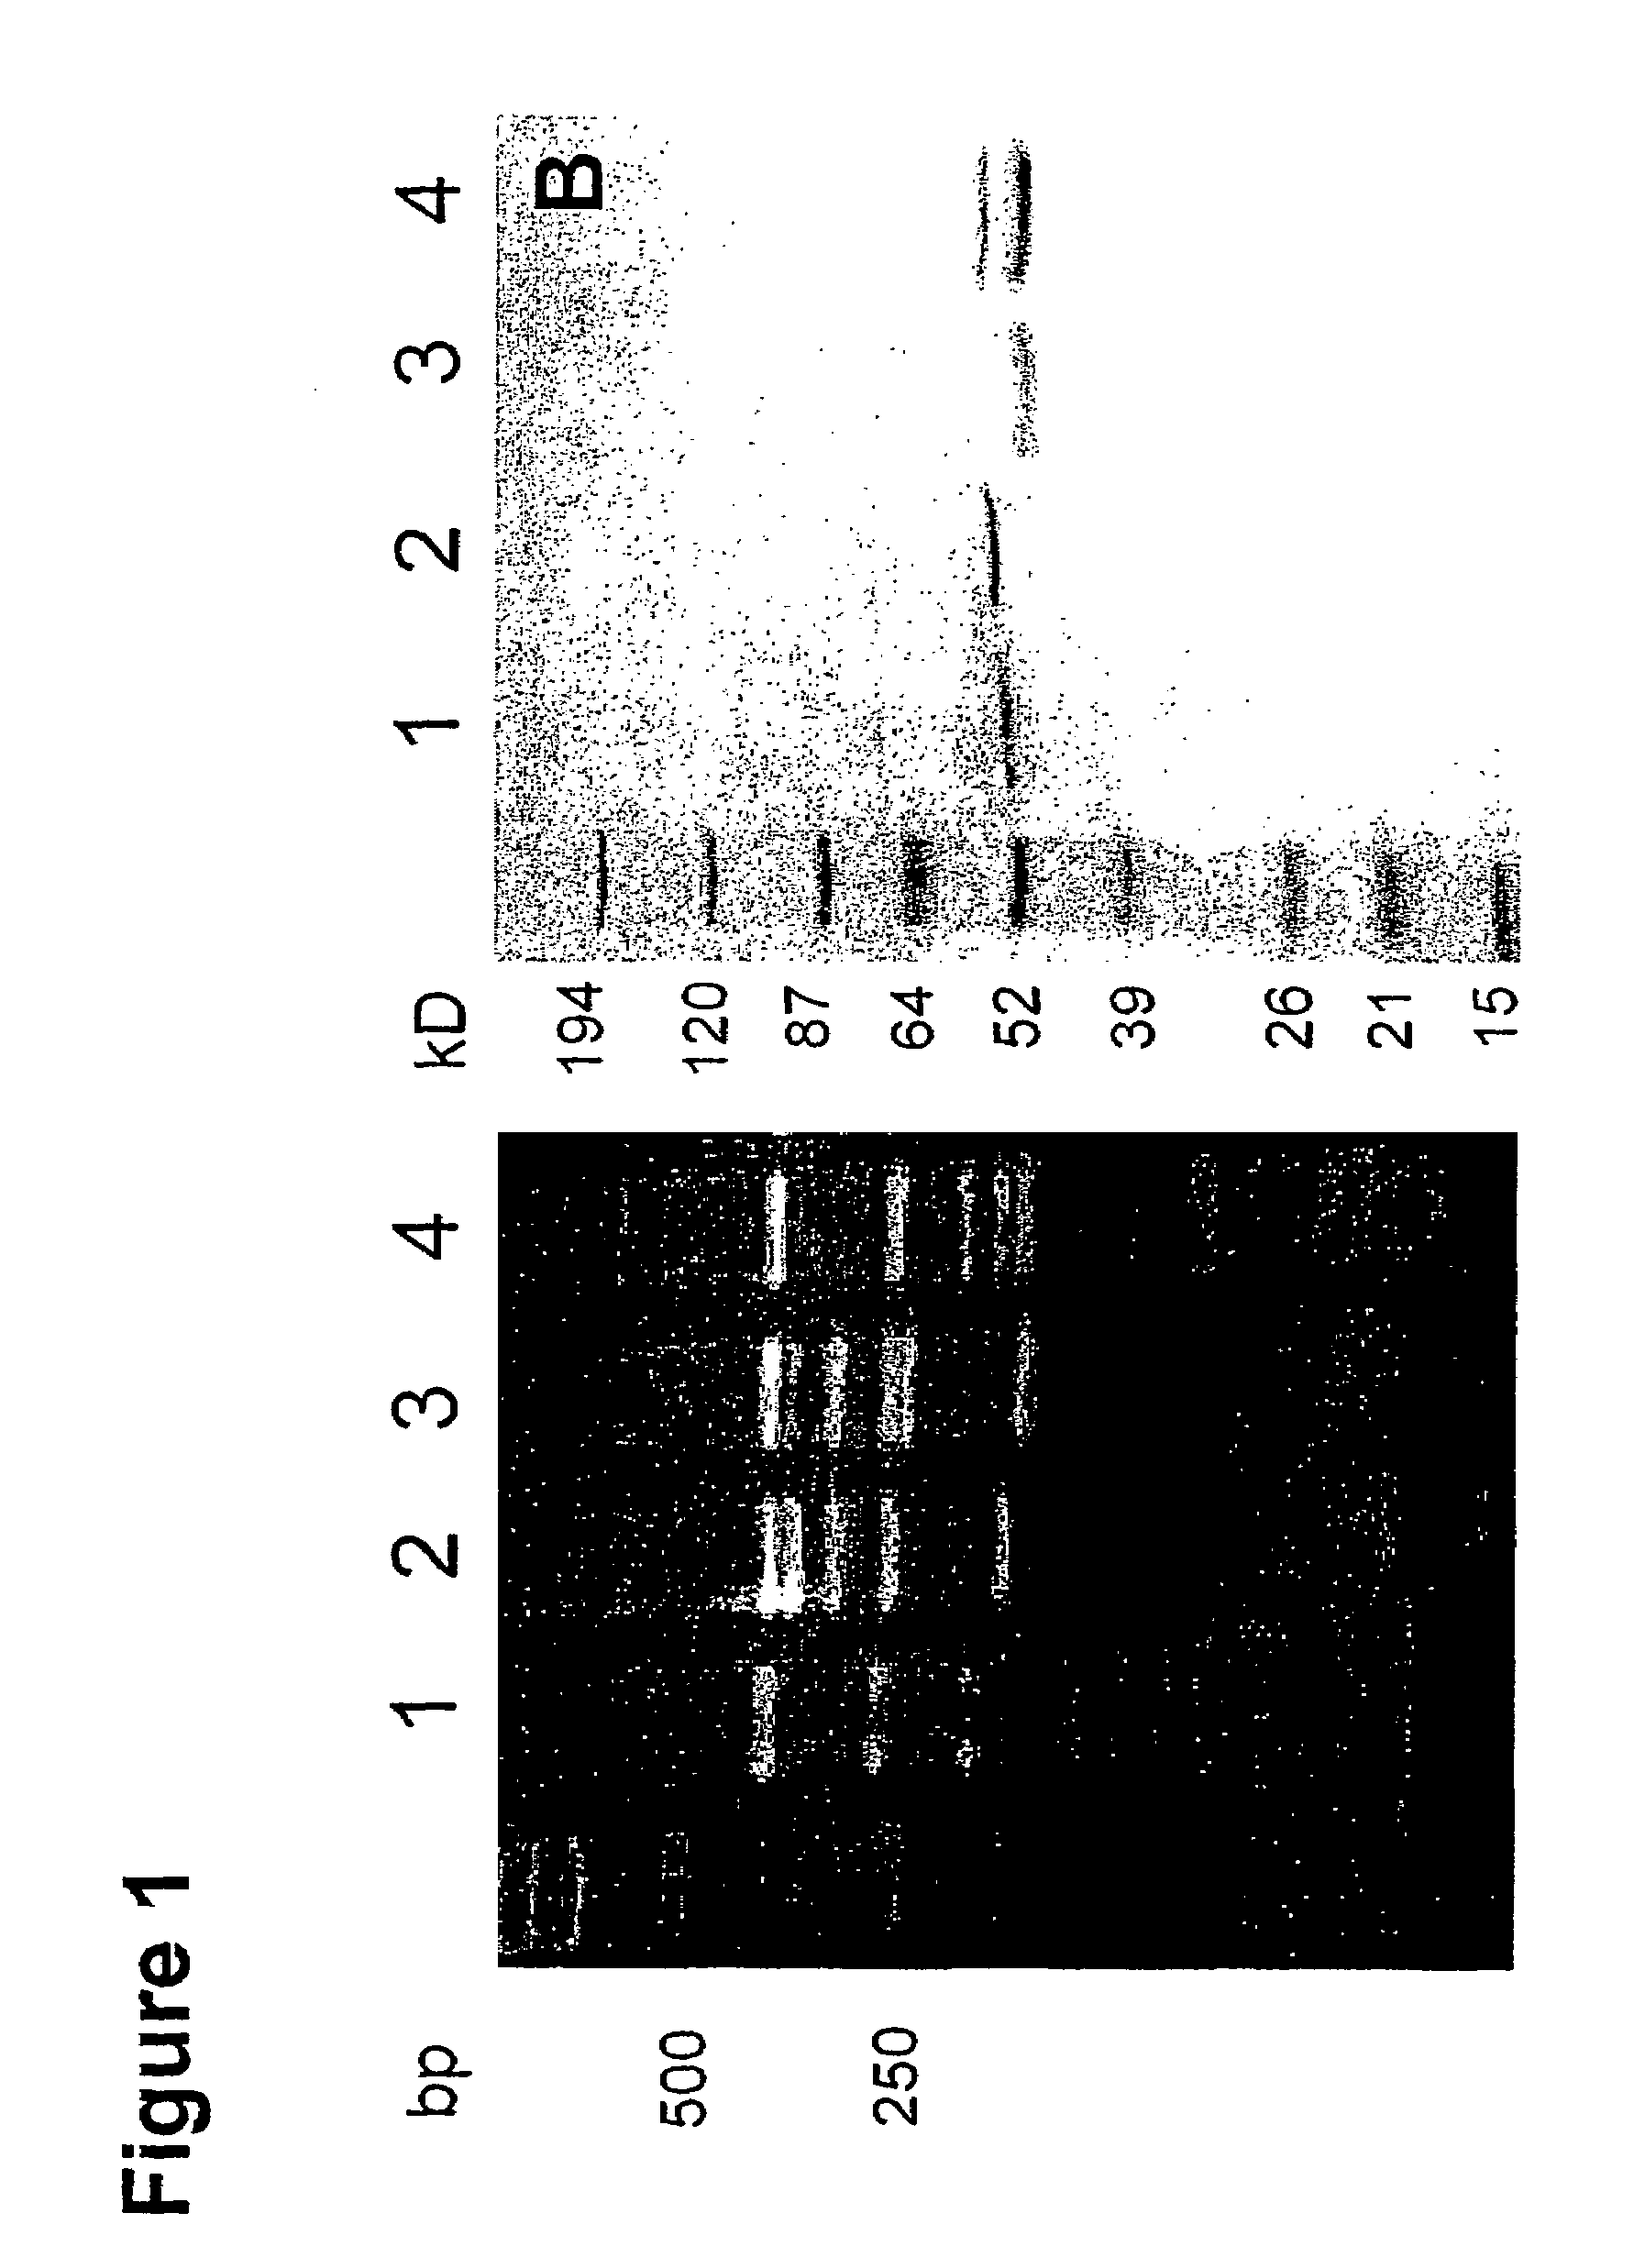 Human antibodies specific to KDR and uses thereof